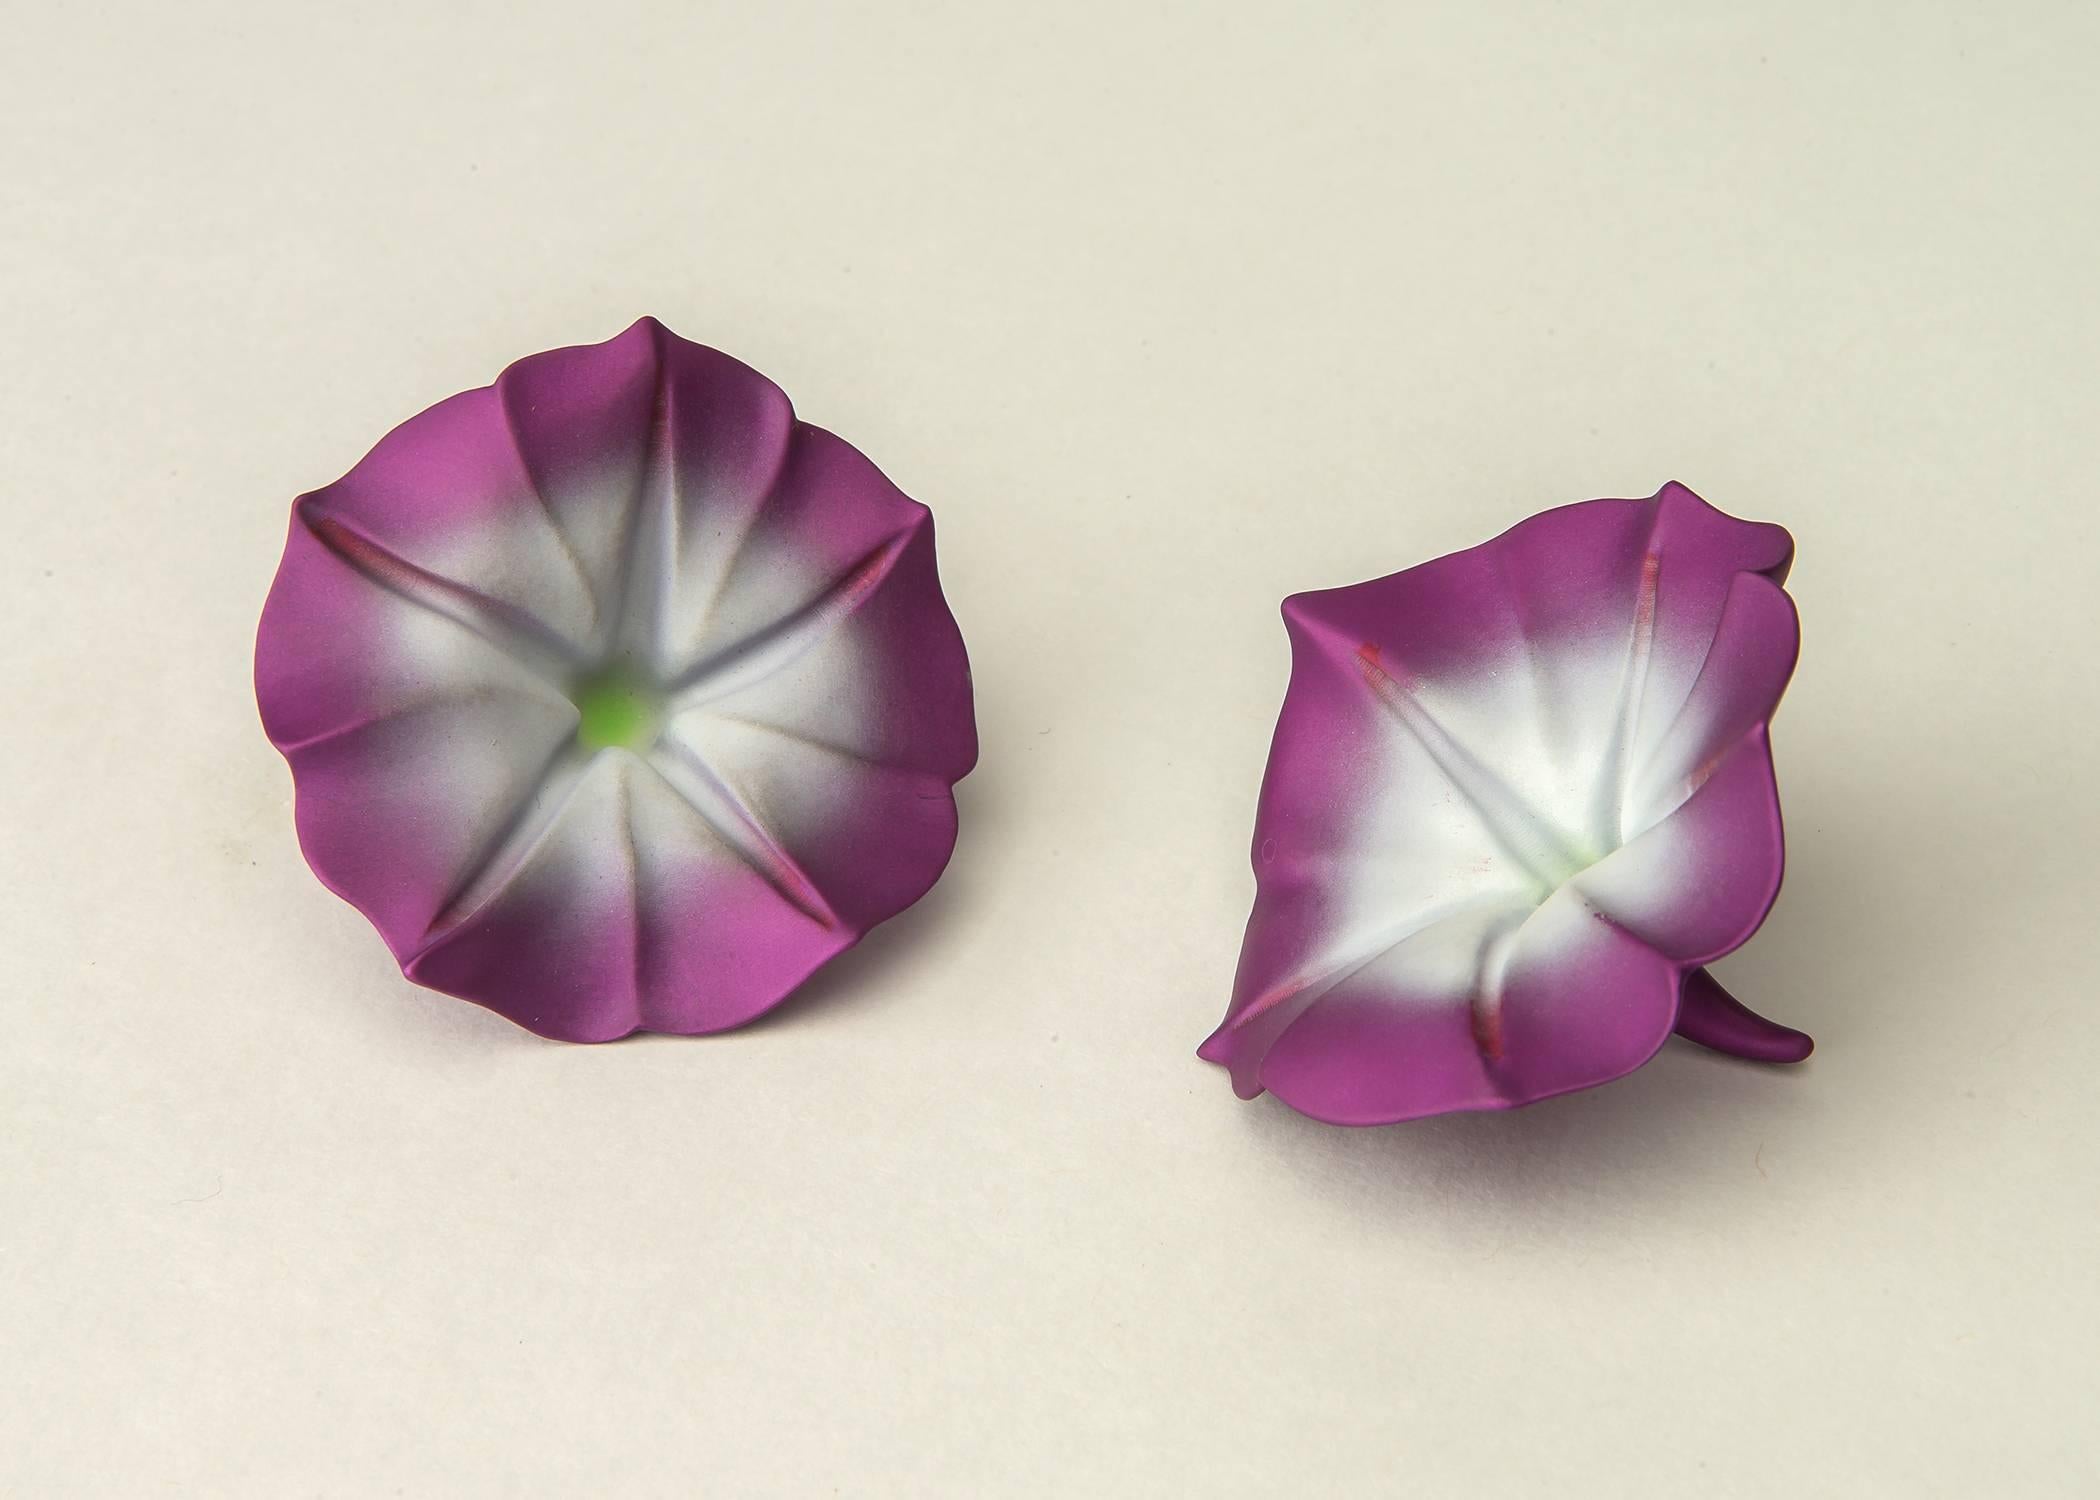 The only living jewelry designer to be honored at The Metropolitan Museum of Art. JAR ( Joel Arthur Rosenthal ) creates wearable sculpture using the simple shape of a flower. Rare and collectable. Never worn mint condition with original suede pouch.